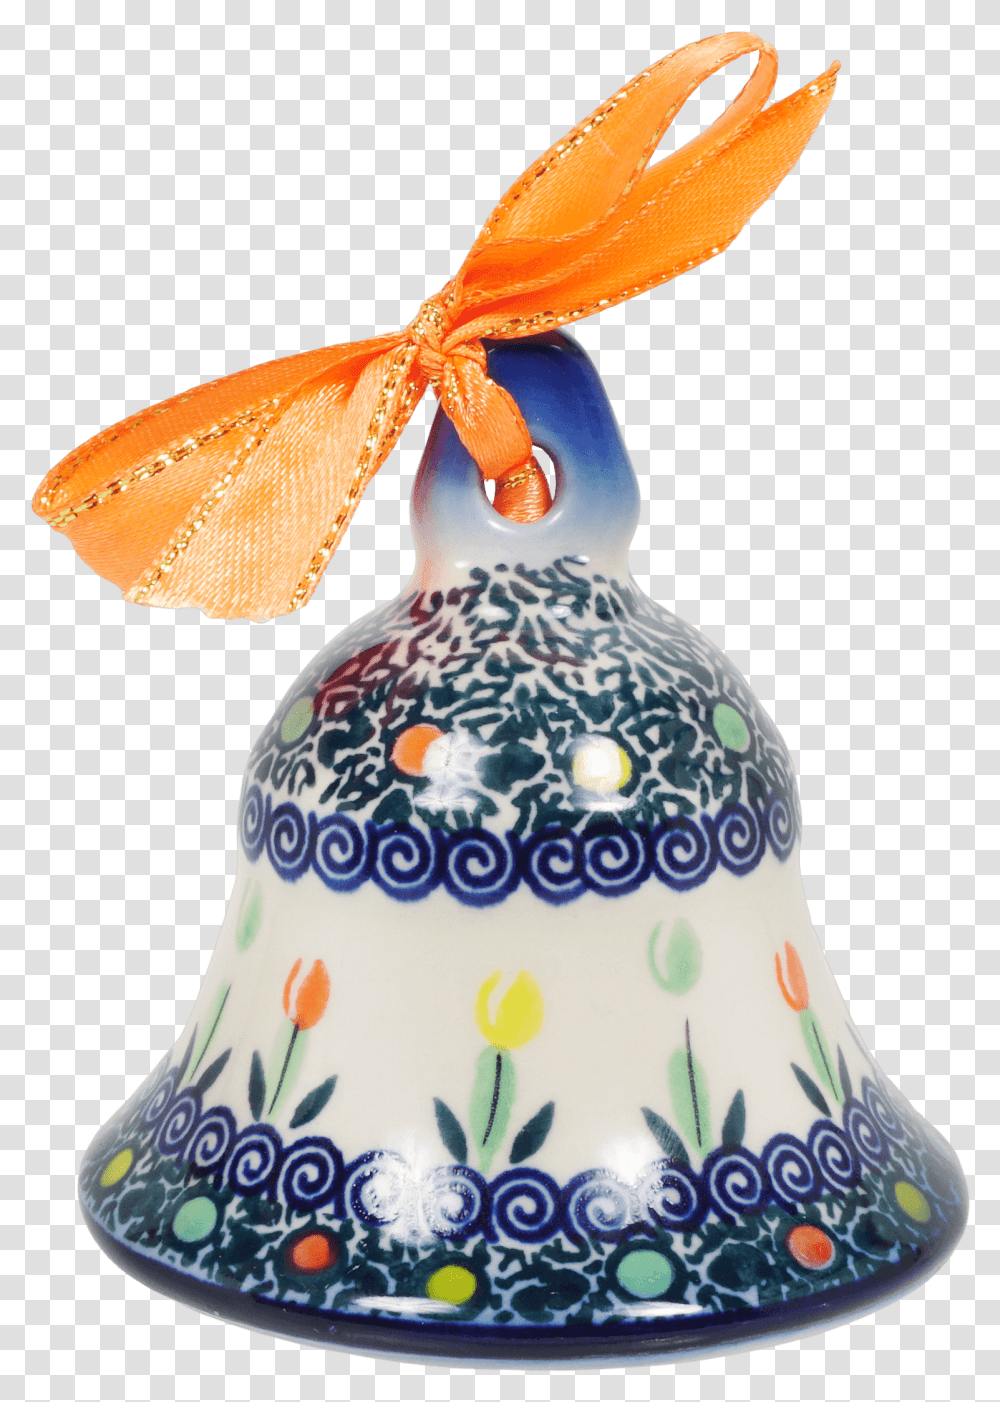 Medium Bell OrnamentClass Lazyload Lazyload Mirage Church Bell, Porcelain, Pottery, Birthday Cake Transparent Png